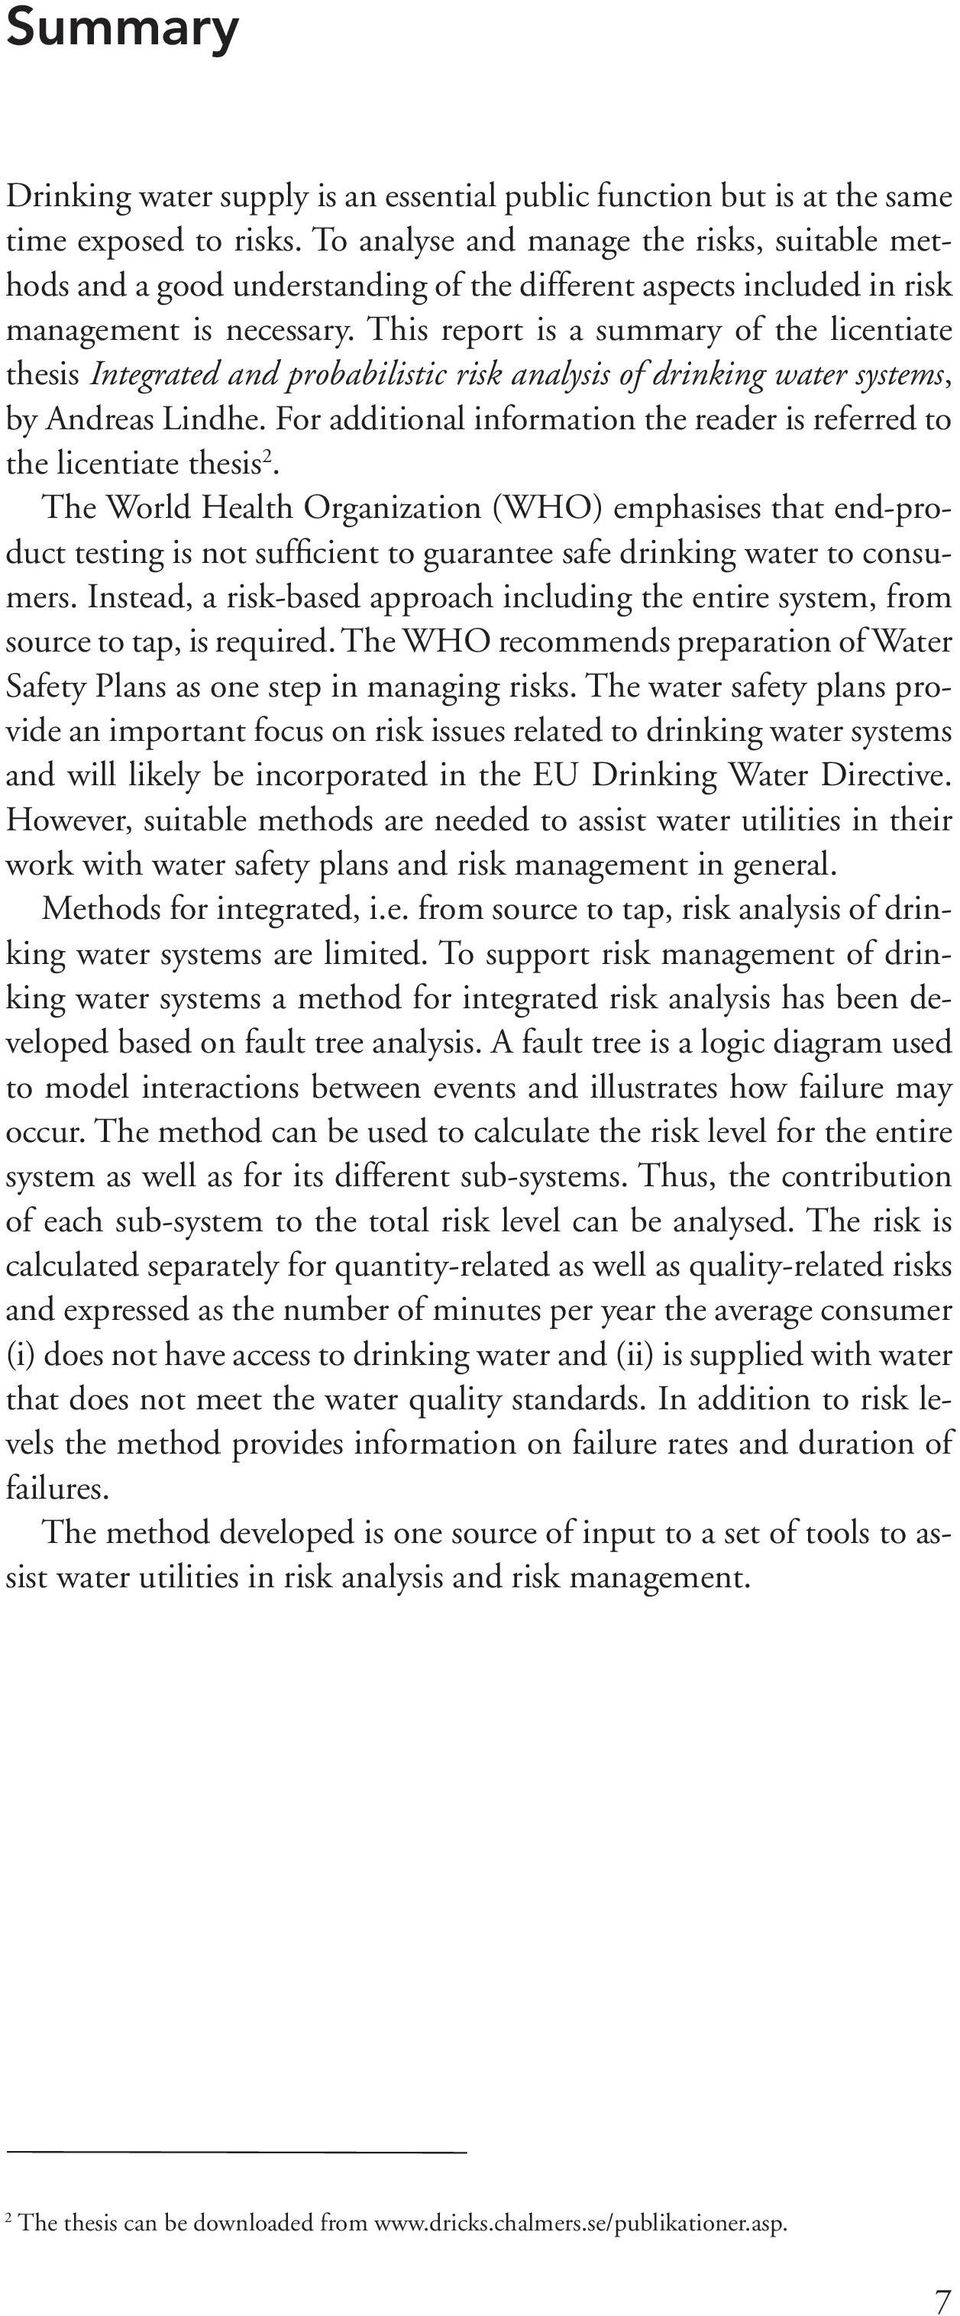 This report is a summary of the licentiate thesis Integrated and probabilistic risk analysis of drinking water systems, by Andreas Lindhe.